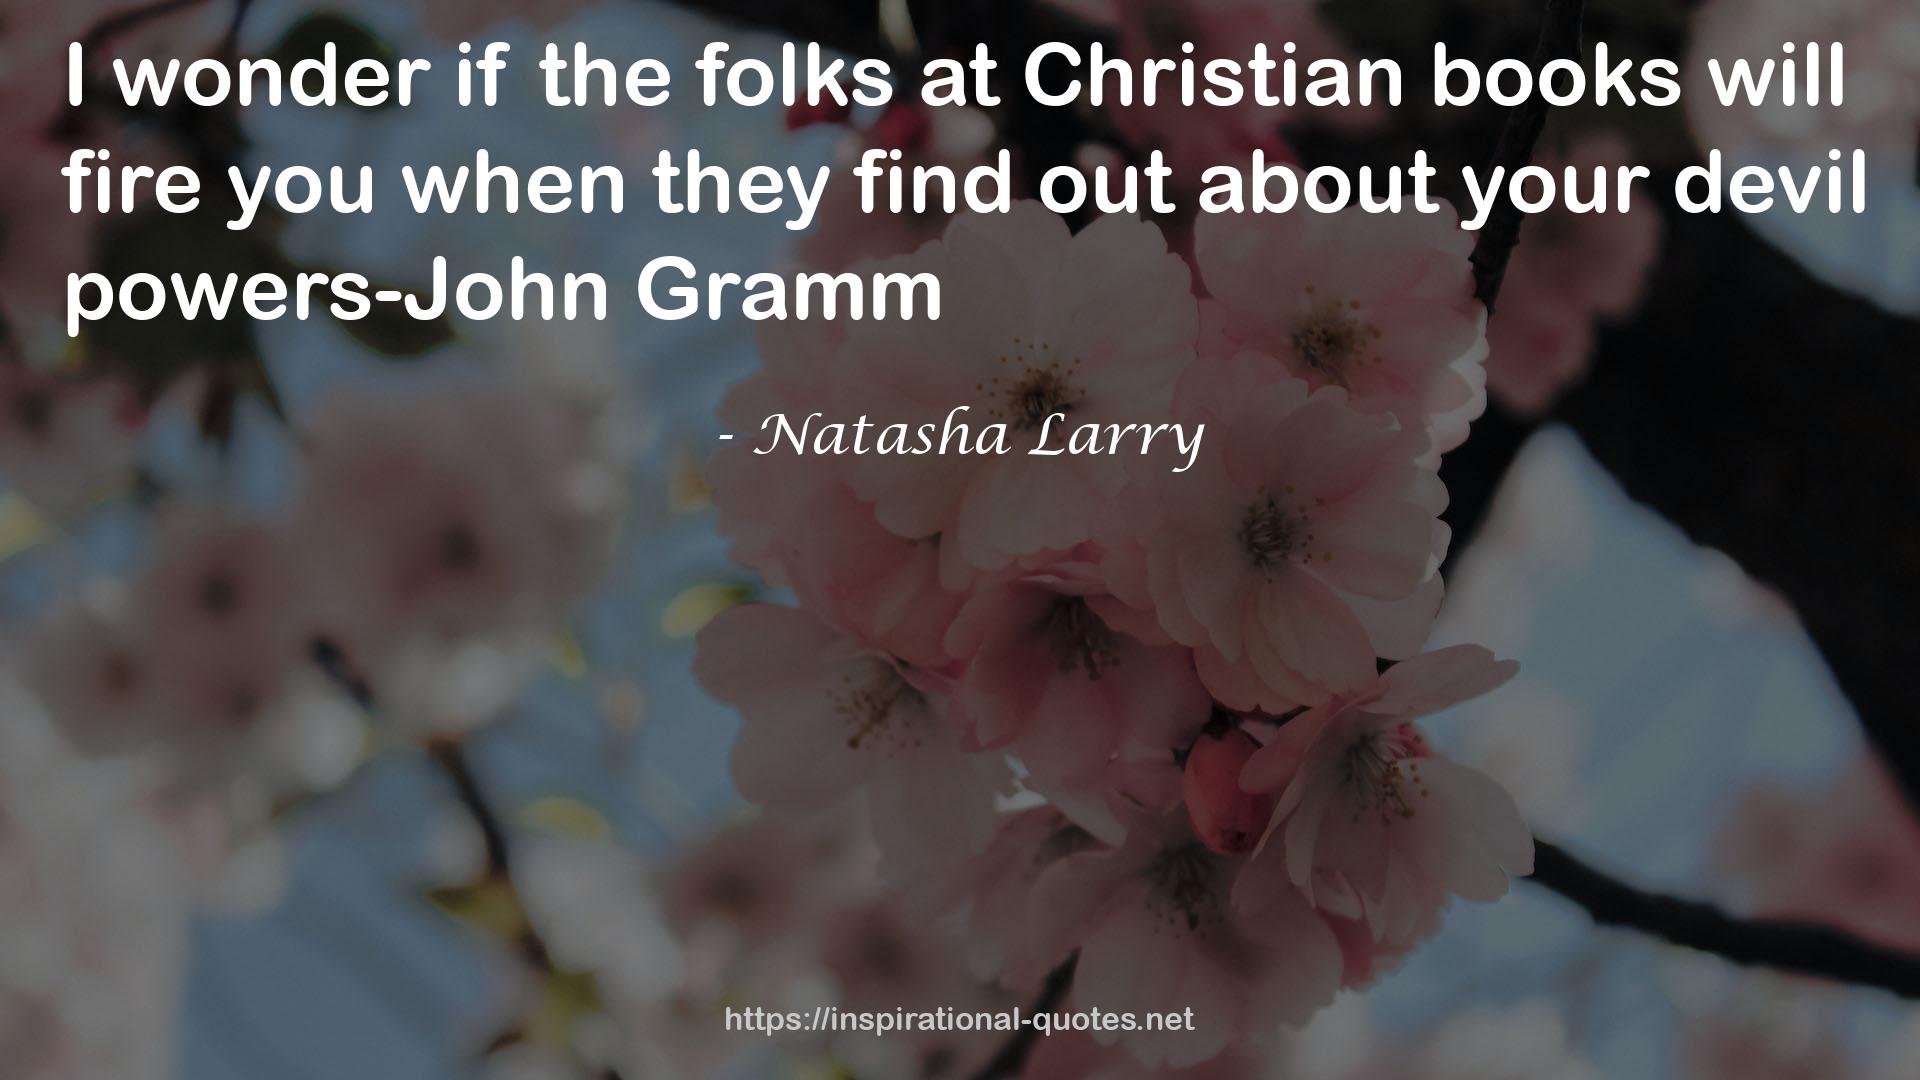 Natasha Larry quote : I wonder if the folks at Christian books will fire you when they find out about your devil powers-John Gramm